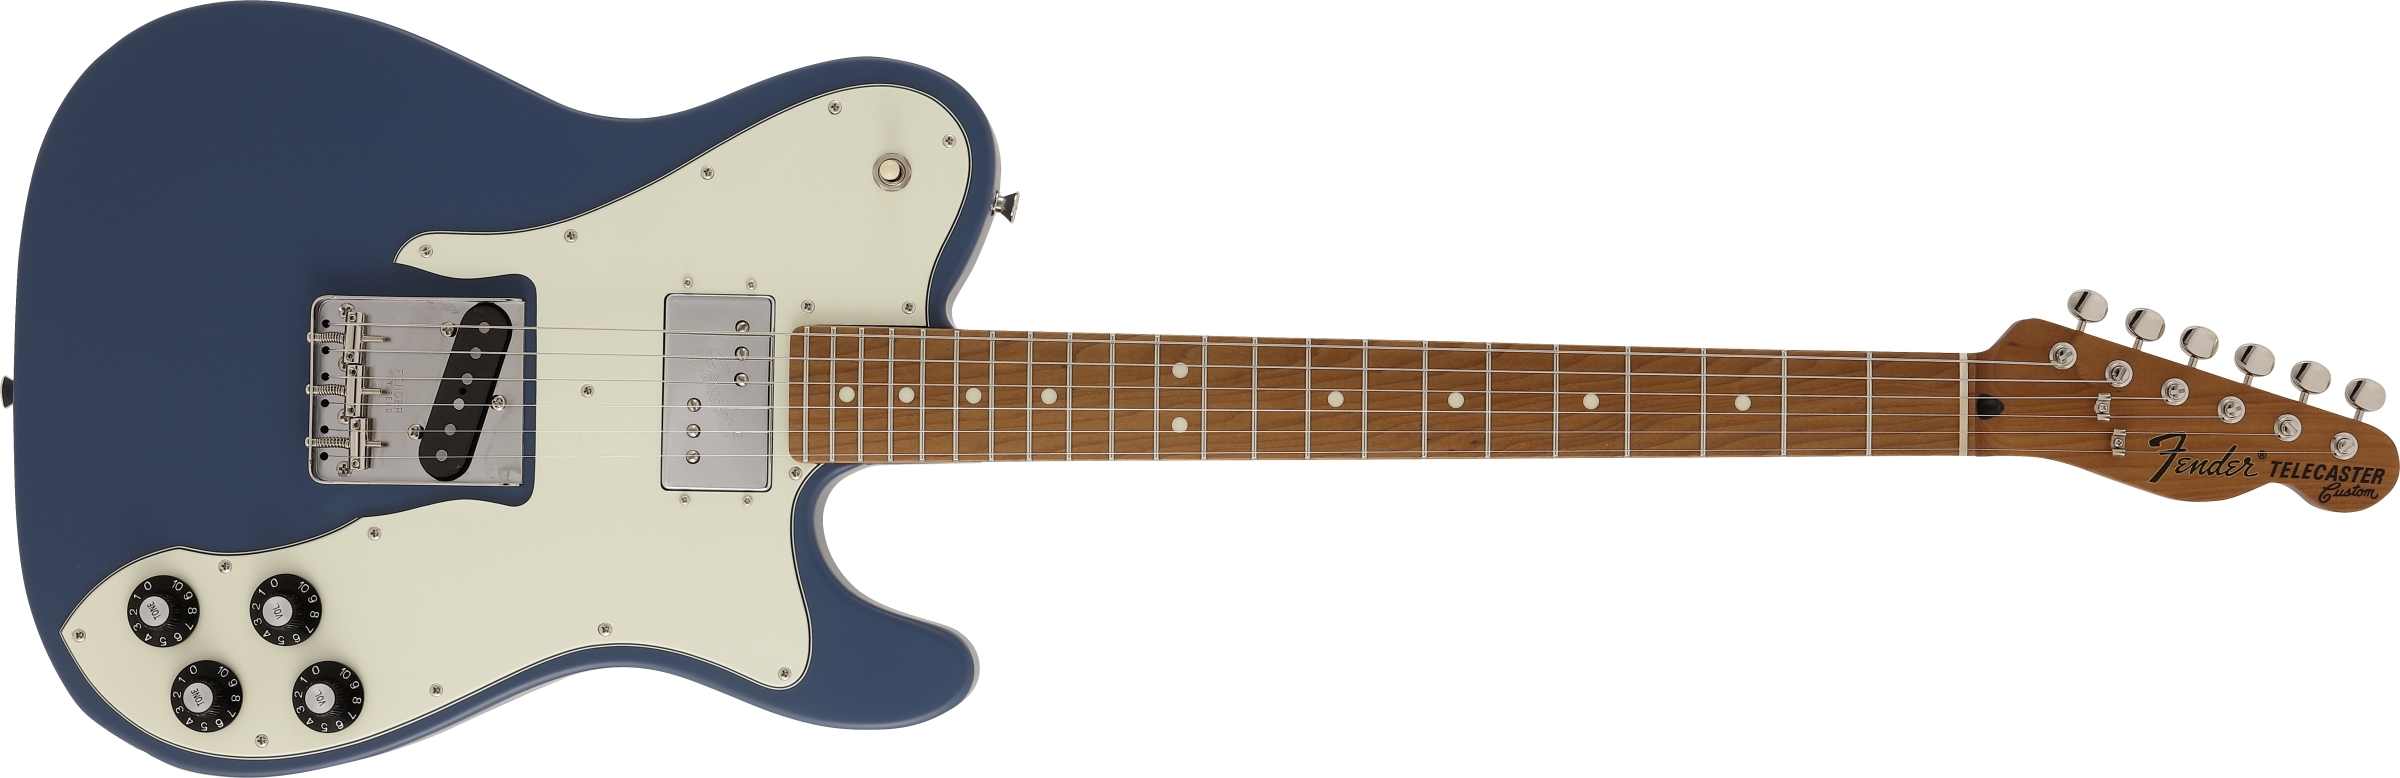 A Japan-only Fender Telecaster with a roasted maple neck